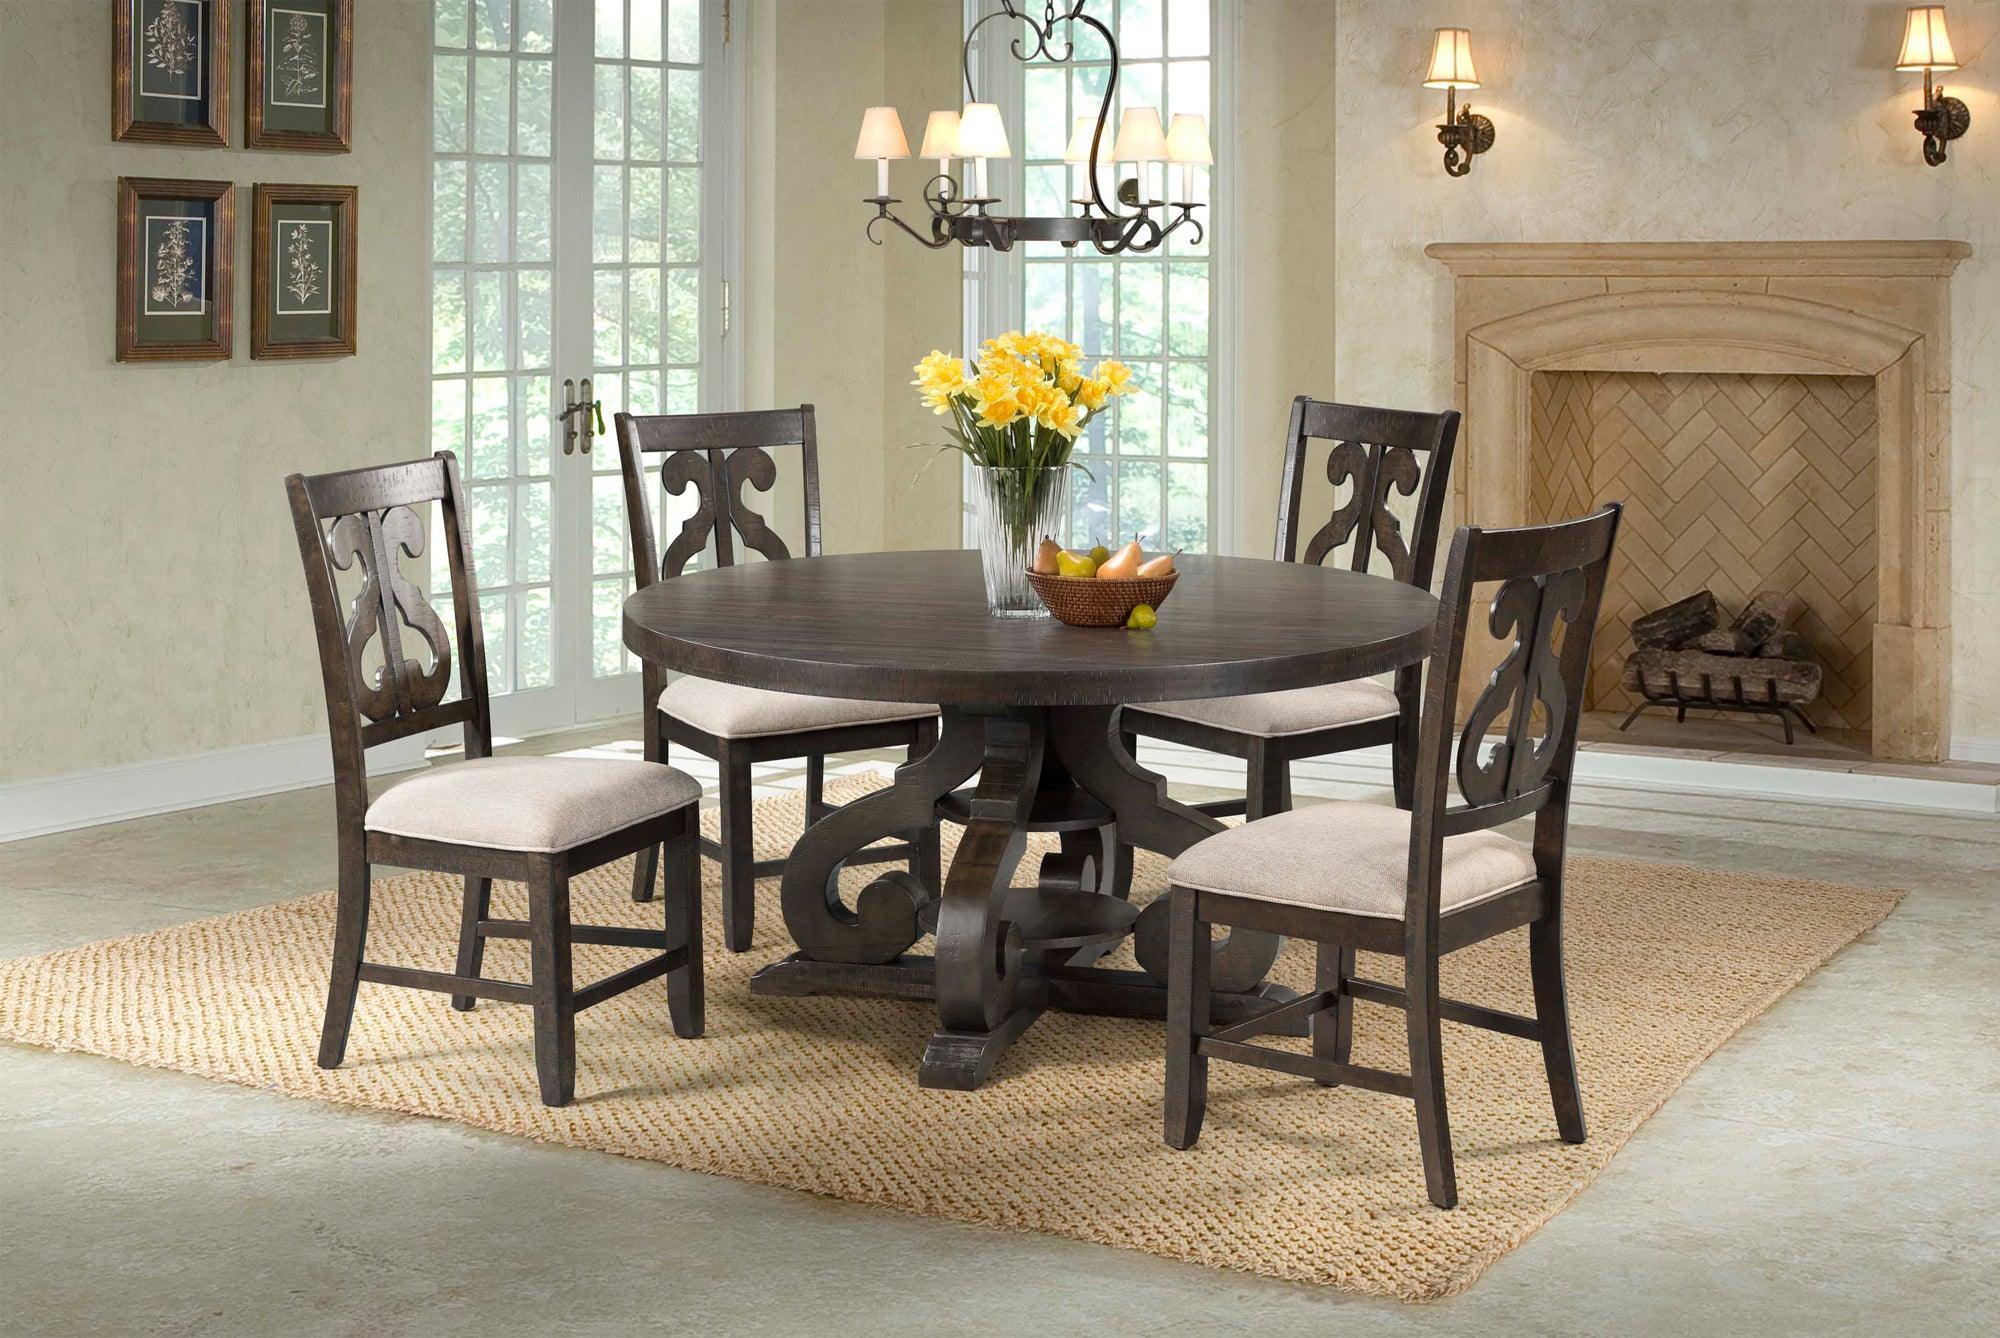 Elements Dining Tables - Stanford Round Dining Table Smokey Walnut